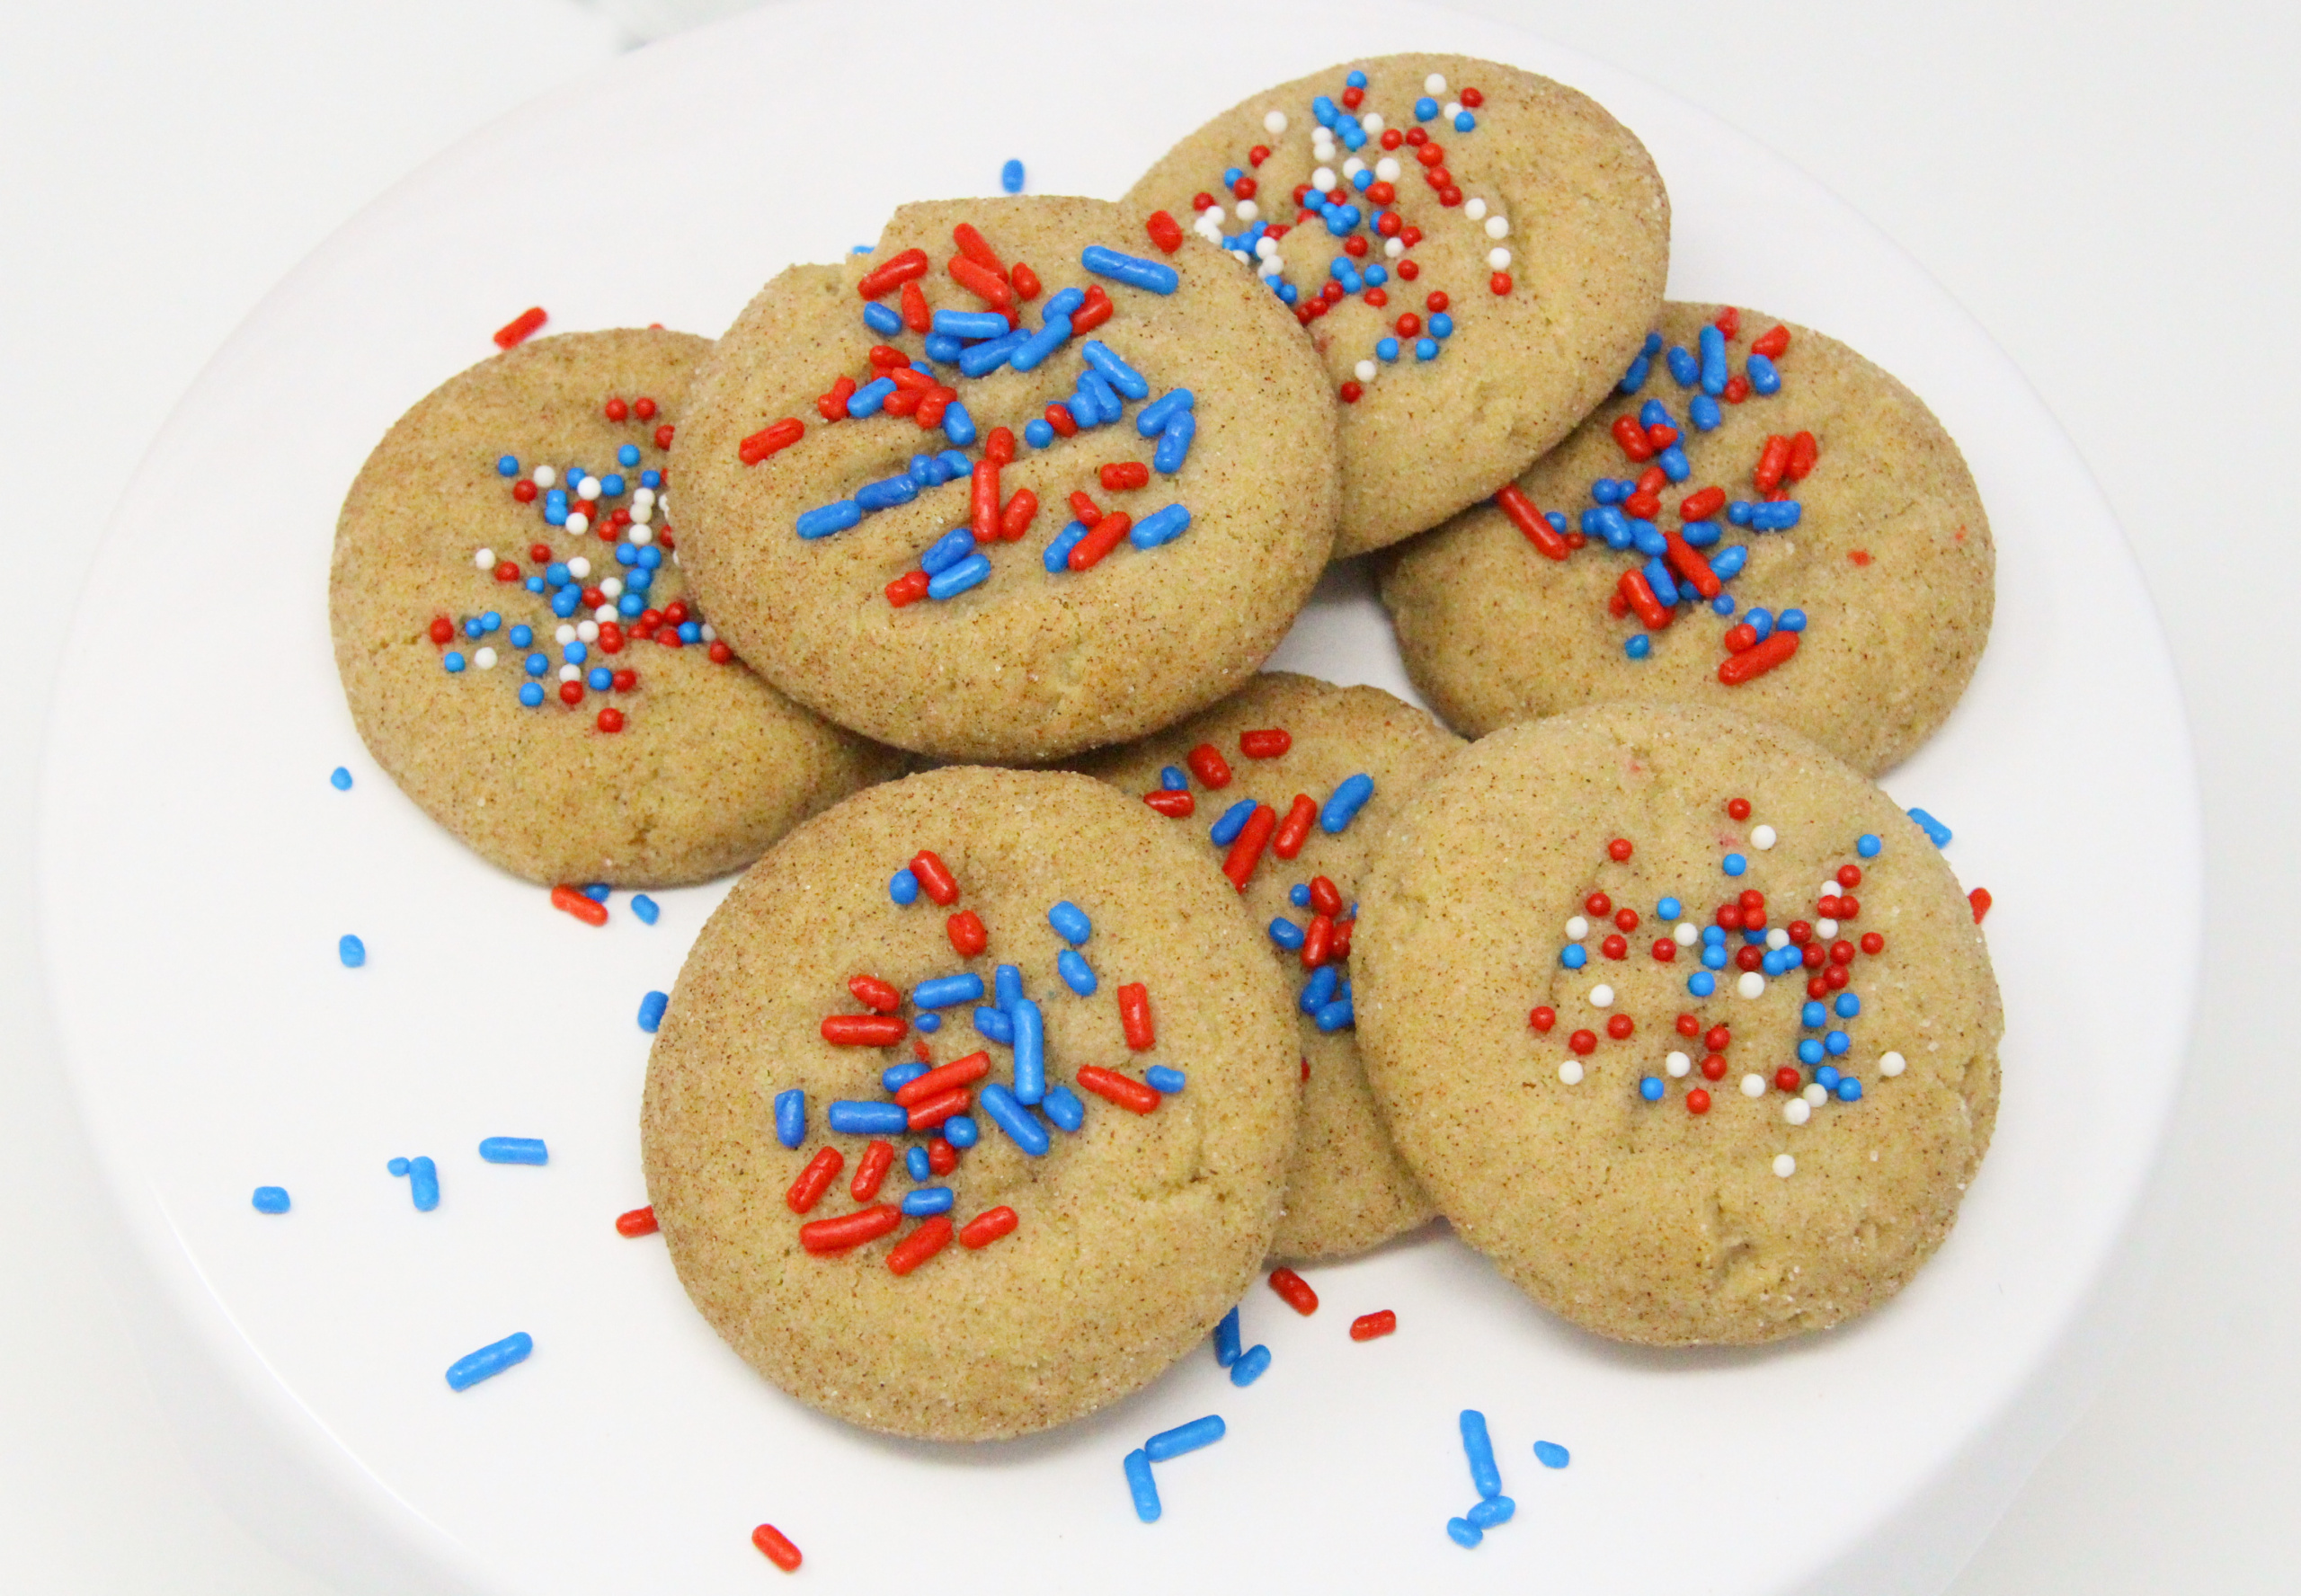 Basically snickerdoodles, the addition of colorful, patriotic sprinkles earns them the name of Yankerdoodles. With the addition of brown sugar to provide a deeper flavor, these soft, childhood favorite cookies will bring back wonderful memories and create new memories with your own family. Recipe shared with permission granted by Maddie Day, author of BATTER OFF DEAD. 